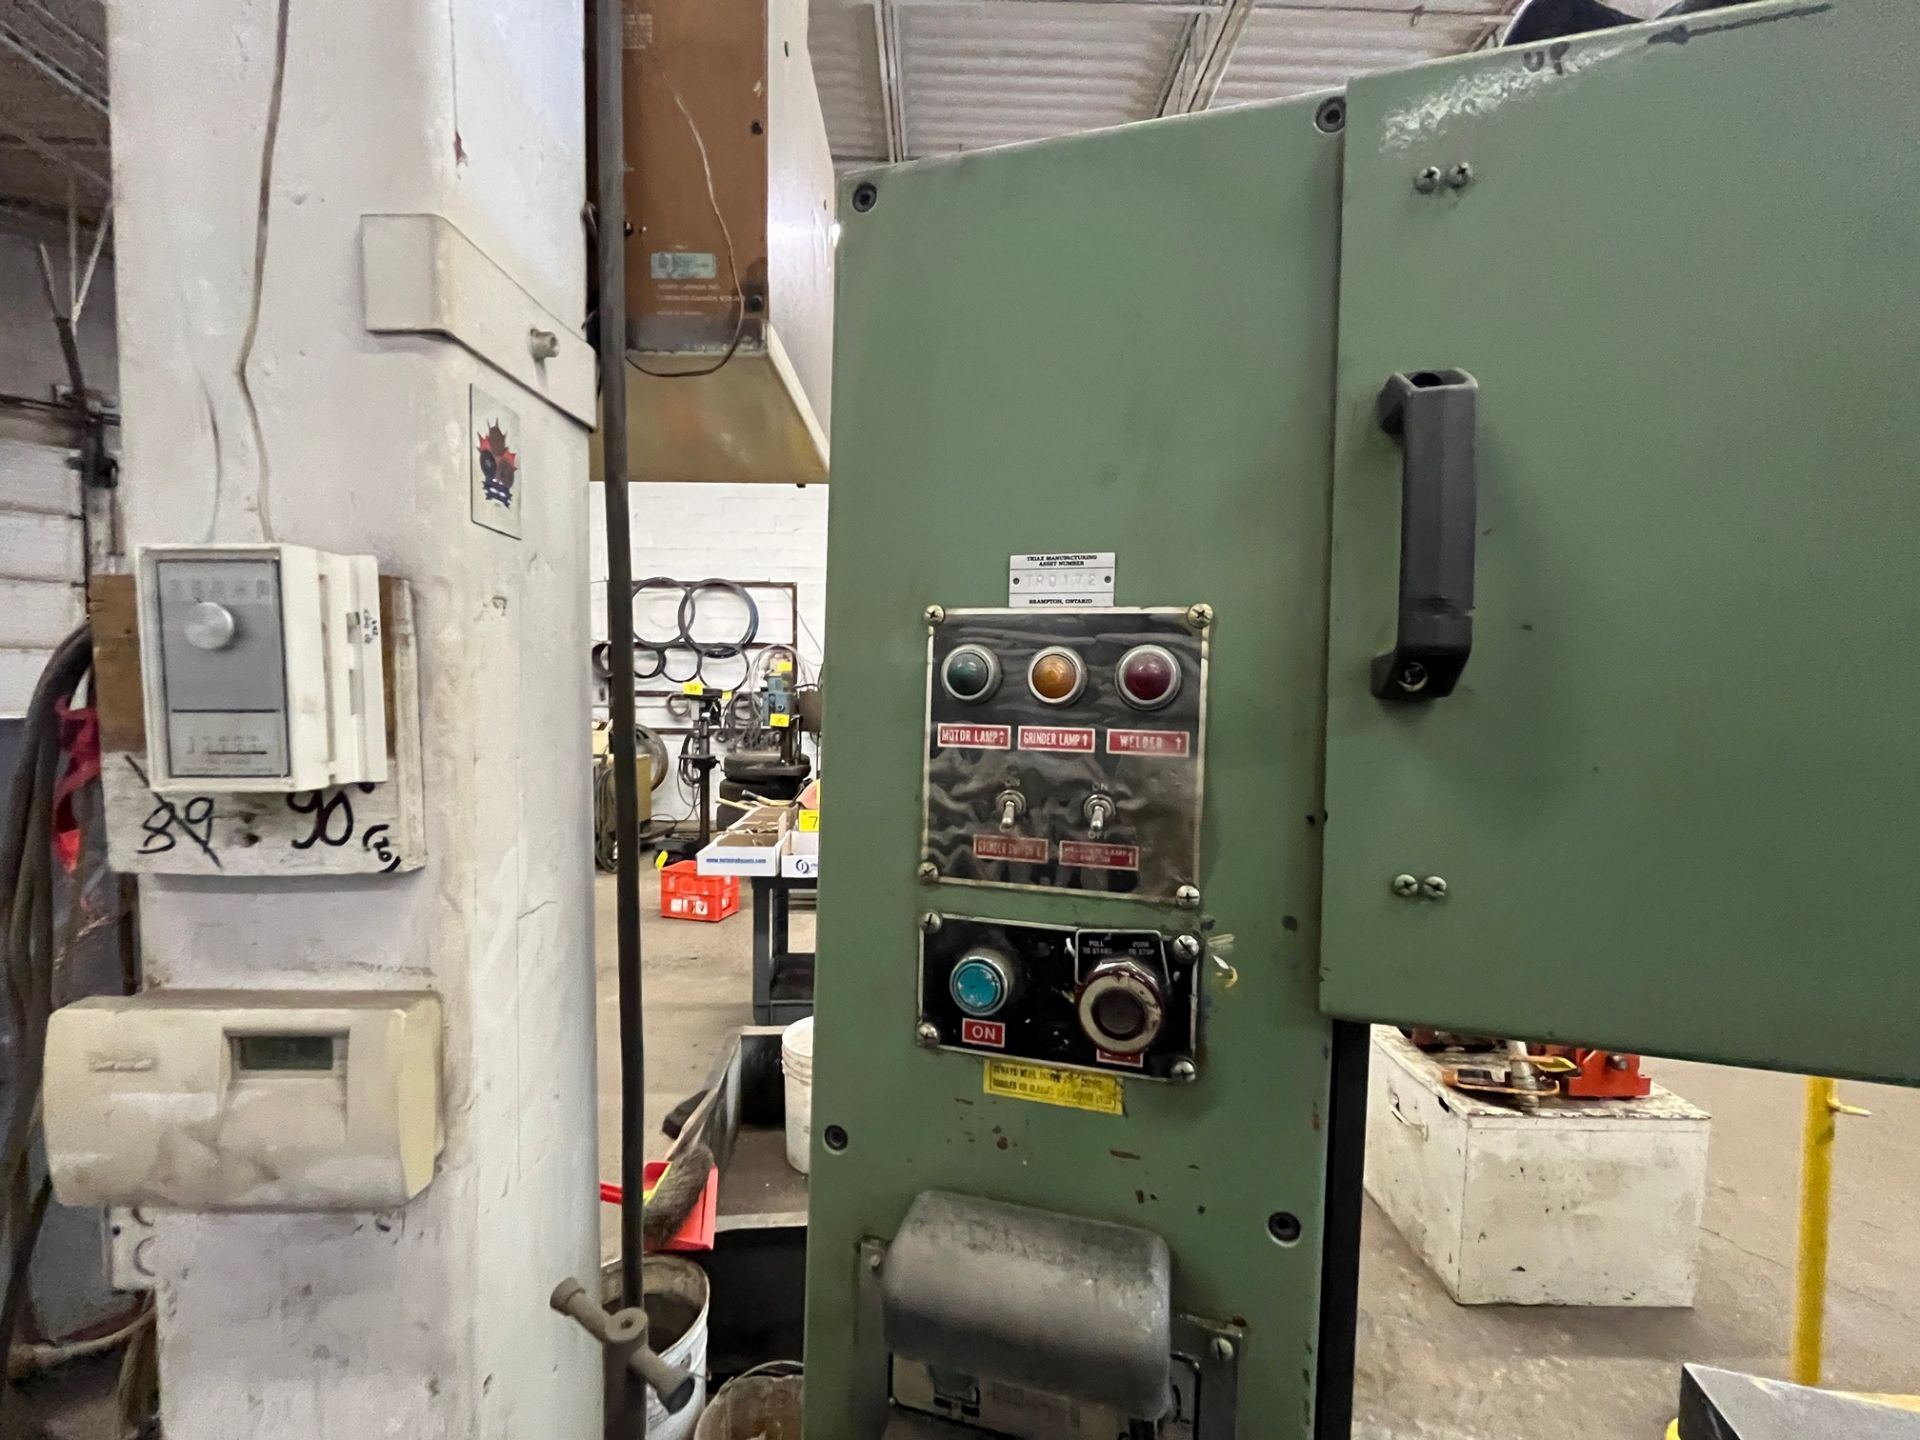 T-JAW T-500 VERTICAL BANDSAW, VARIABLE SPEED, 575V, 28" THROAT, 29" X 27" TABLE, BLADE WELDER, SPARE - Image 7 of 9